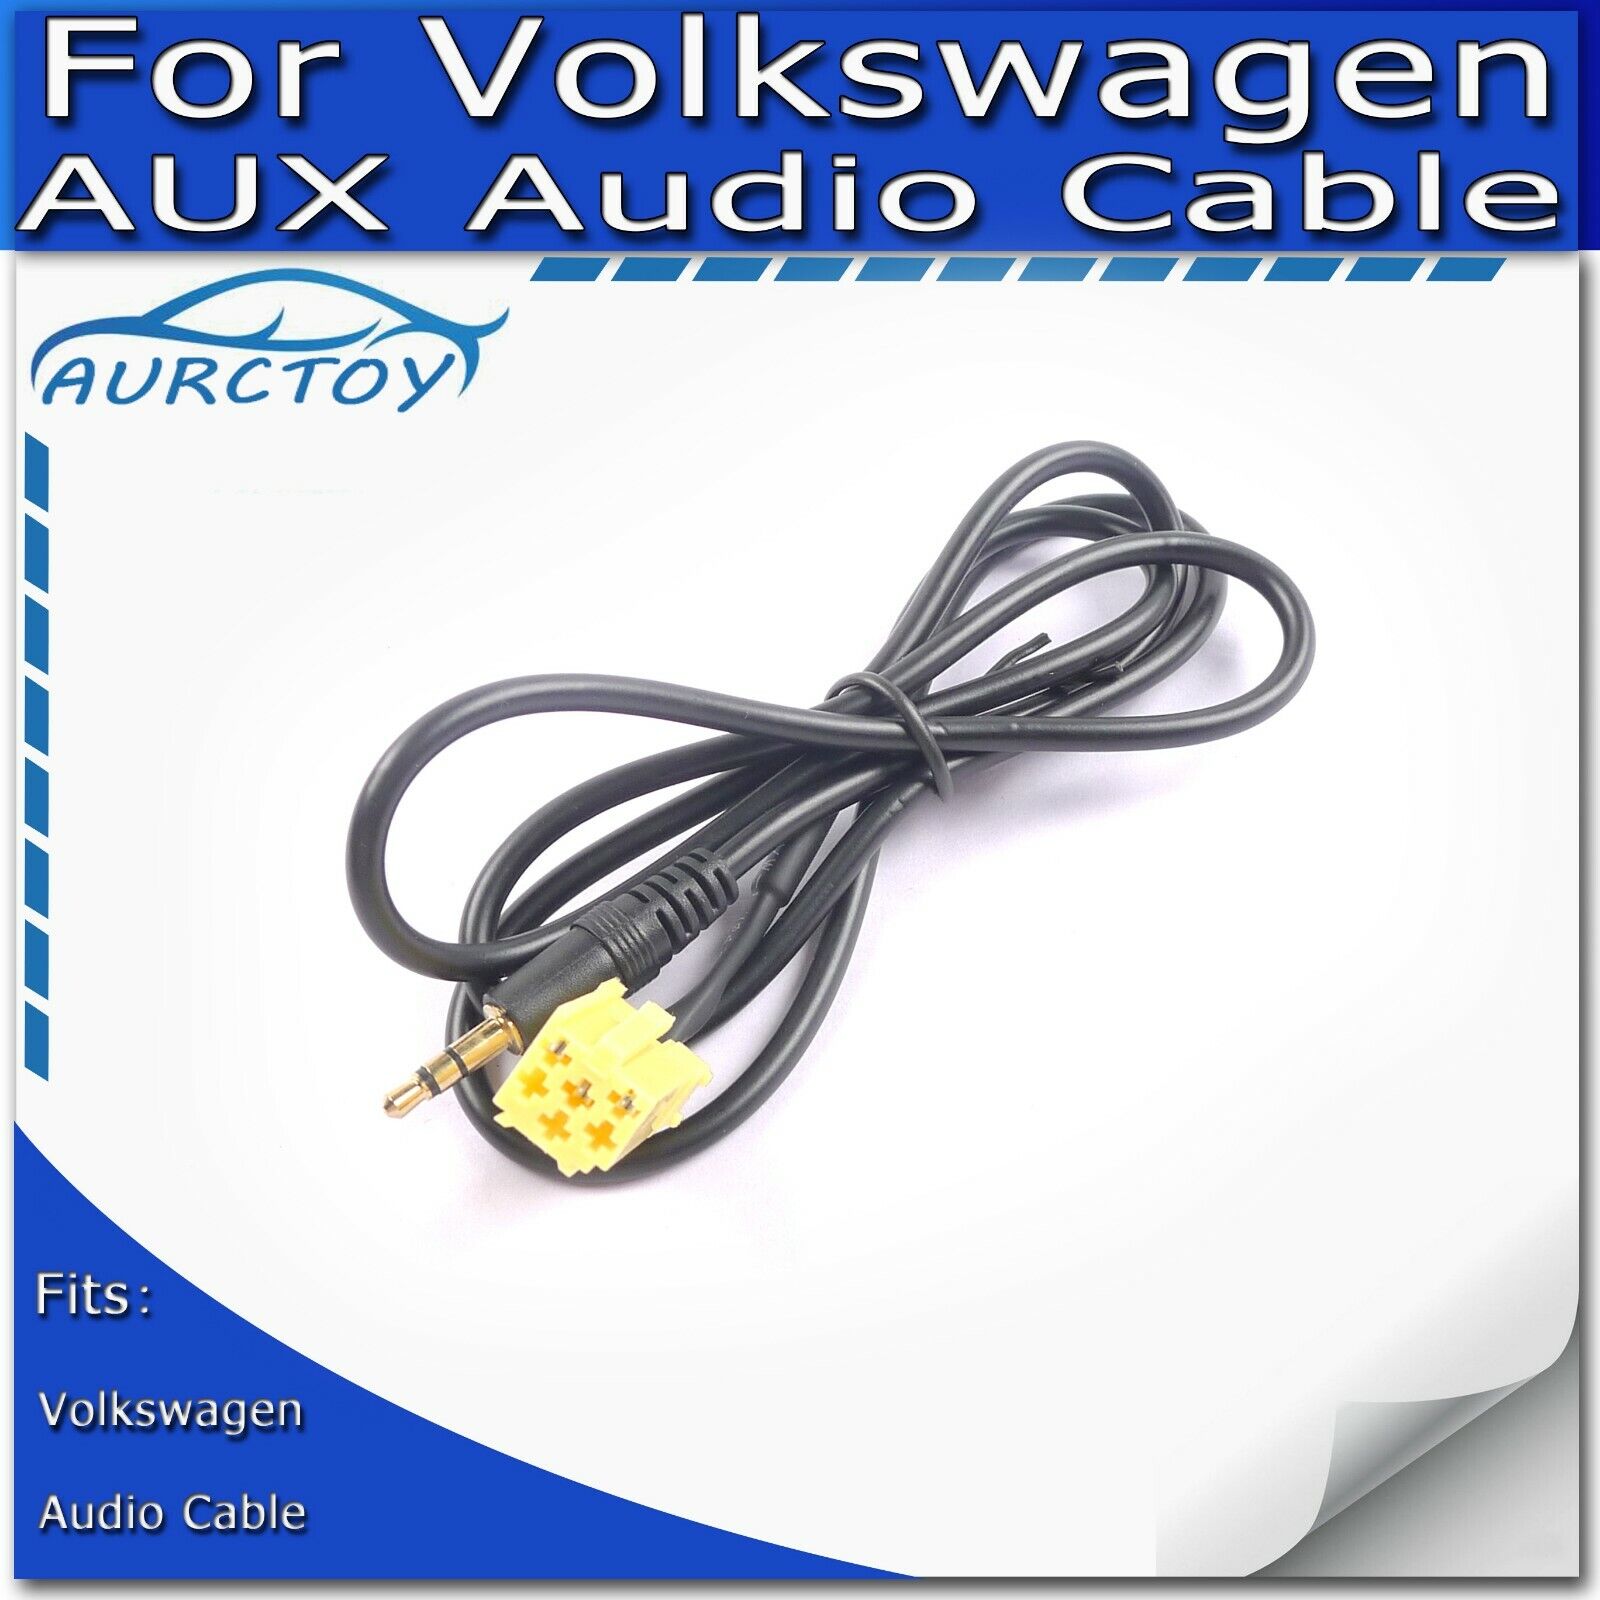 AUX harness cable ADAPTER CABLE For VW Fiat Grande Punto Alfa Romeo 159 socket